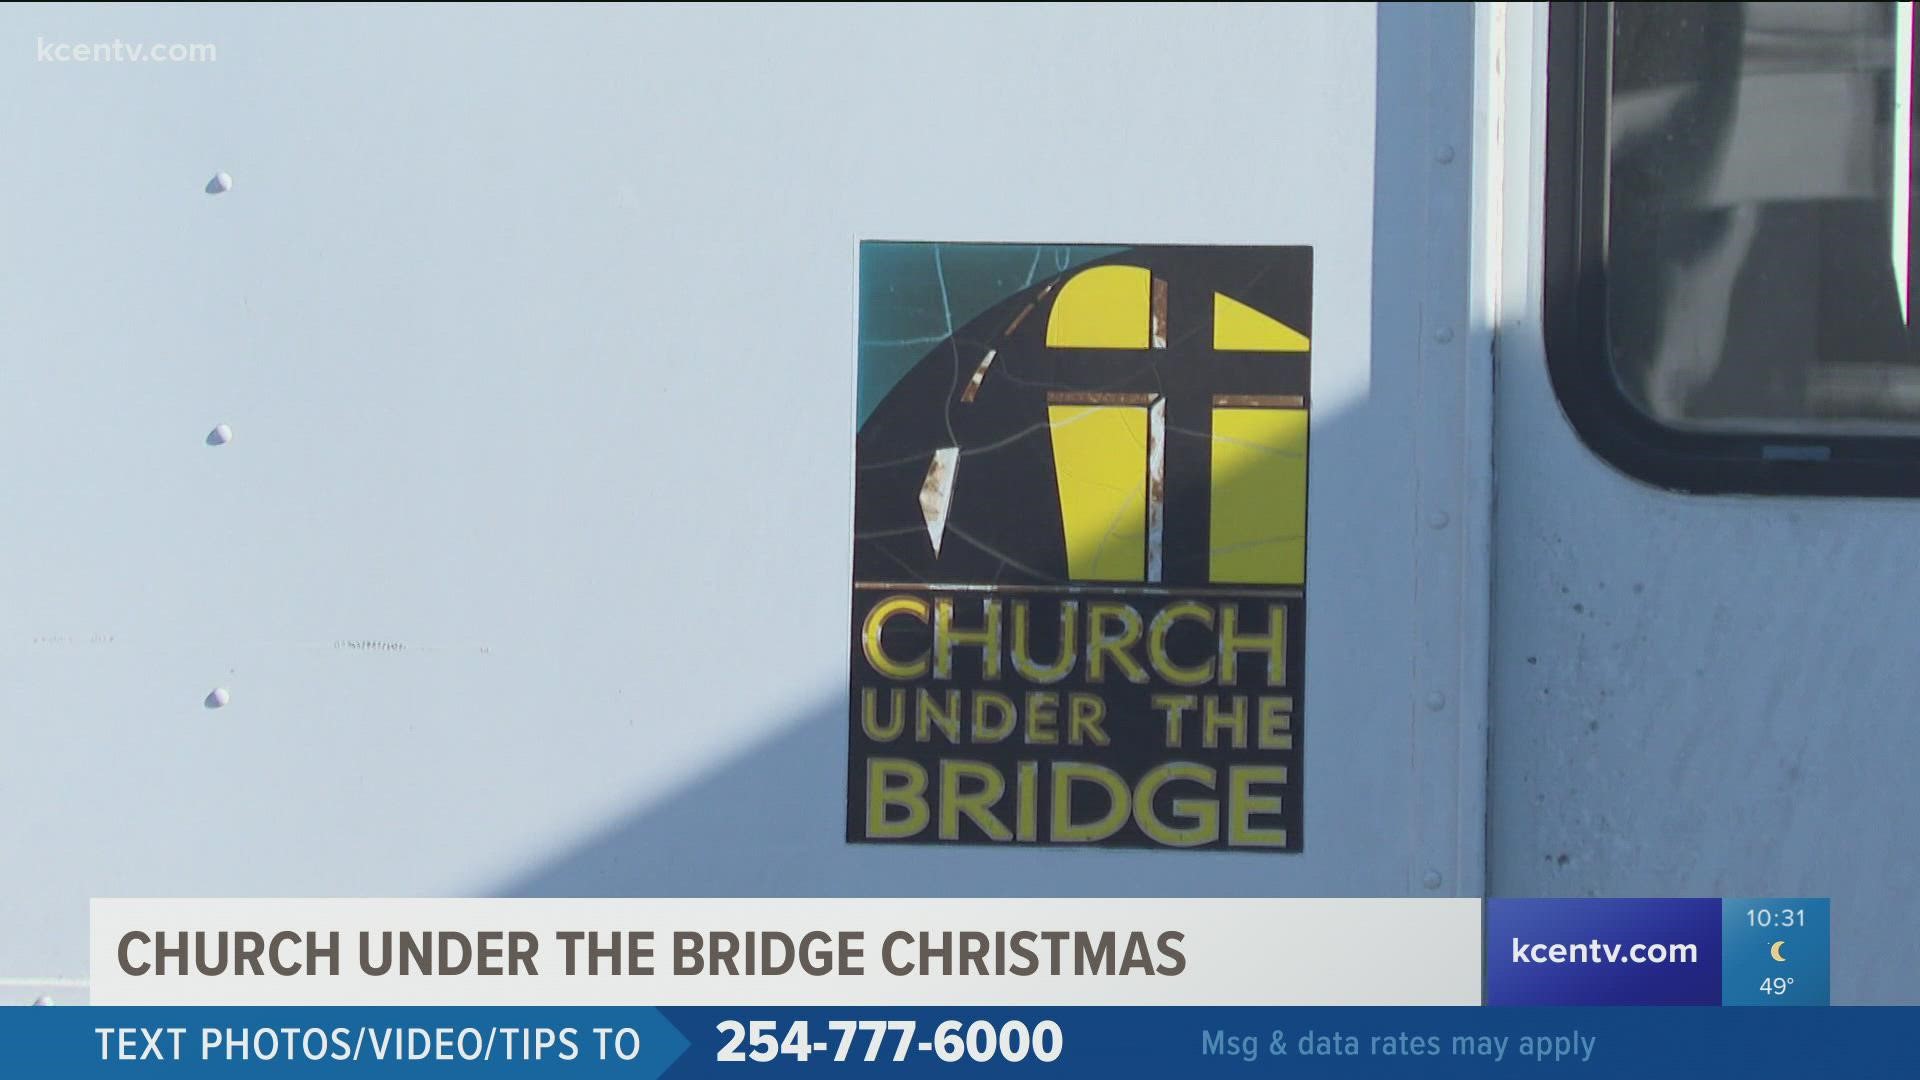 Church Under the Bridge celebrated Christmas a little early as they gave out gifts the homeless